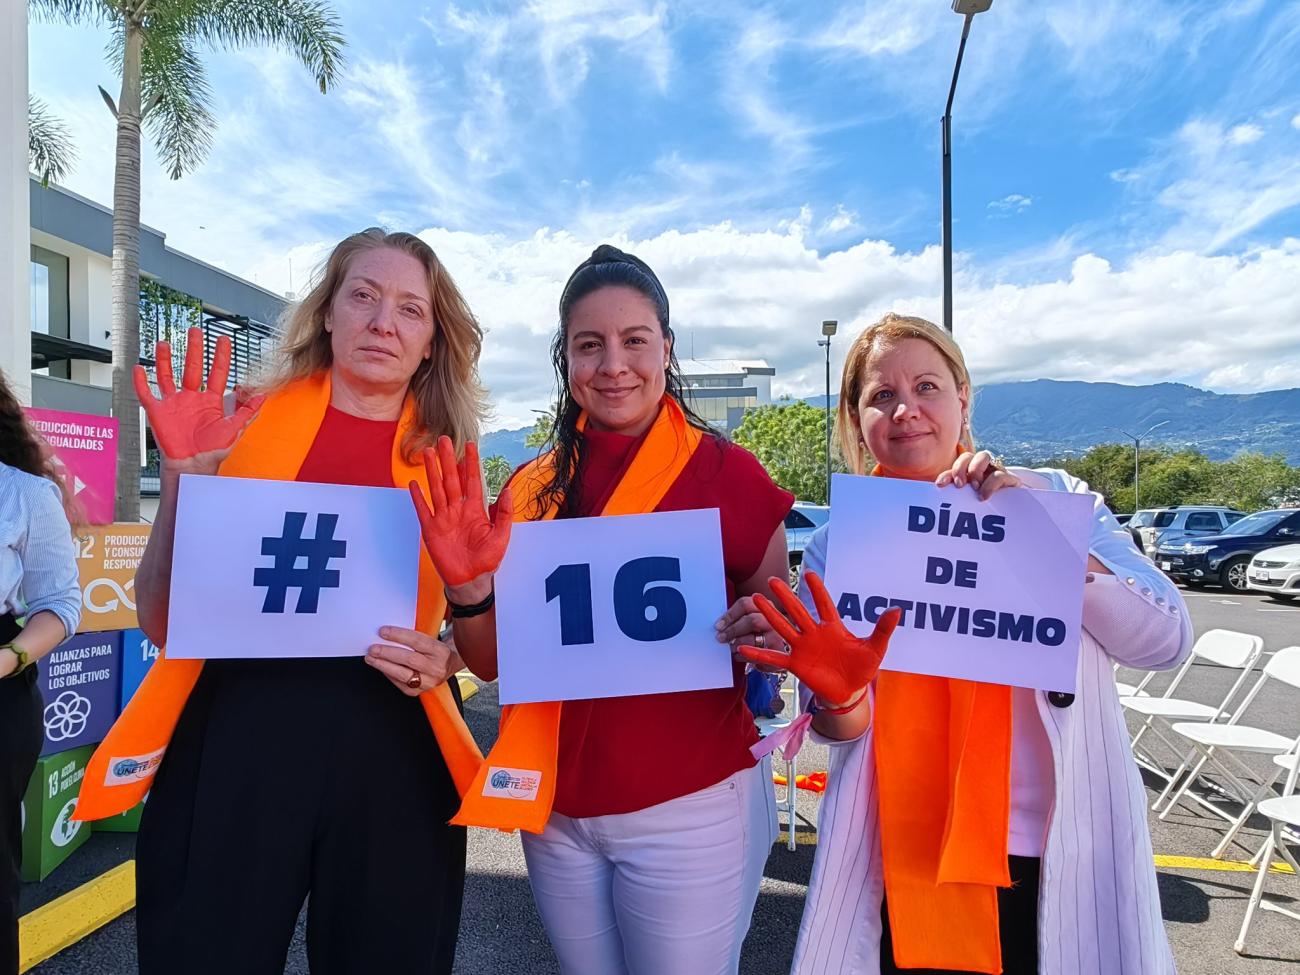 Three women, wear orange scarves and carry signs demanding an end to violence against women.